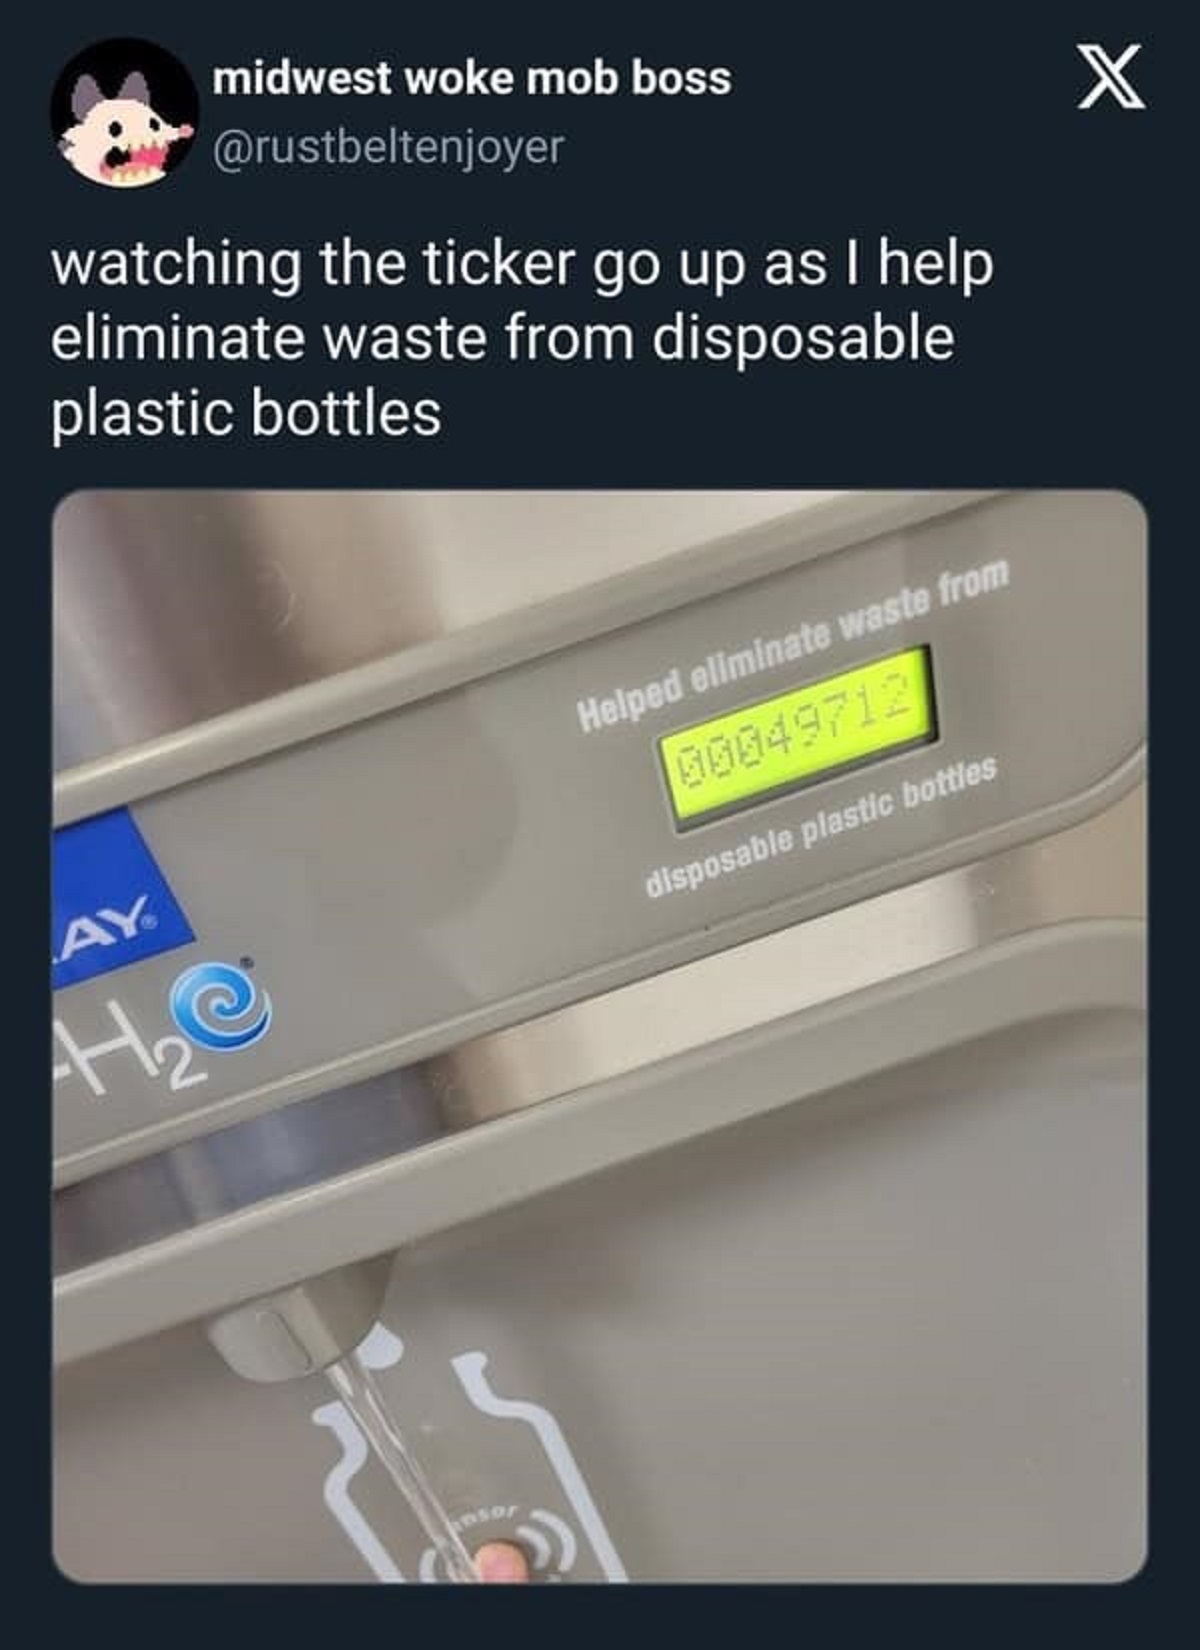 signage - midwest woke mob boss watching the ticker go up as I help eliminate waste from disposable plastic bottles Ay He Helped eliminate waste from 00049712 disposable plastic bottles X